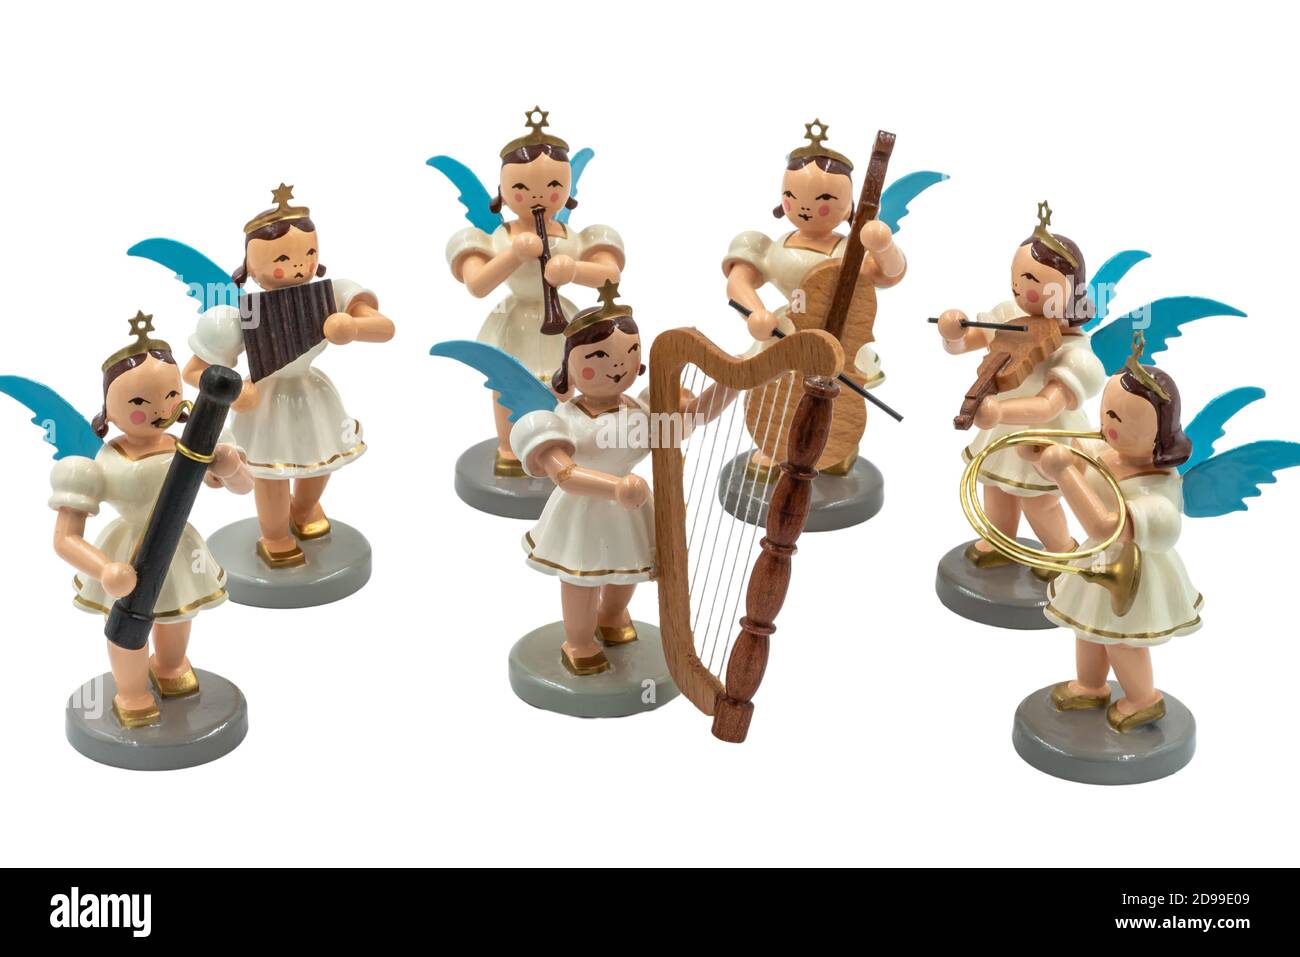 Closeup of two original wooden German Christmas Angels figurines with music instruments as orchestra on a white background Stock Photo